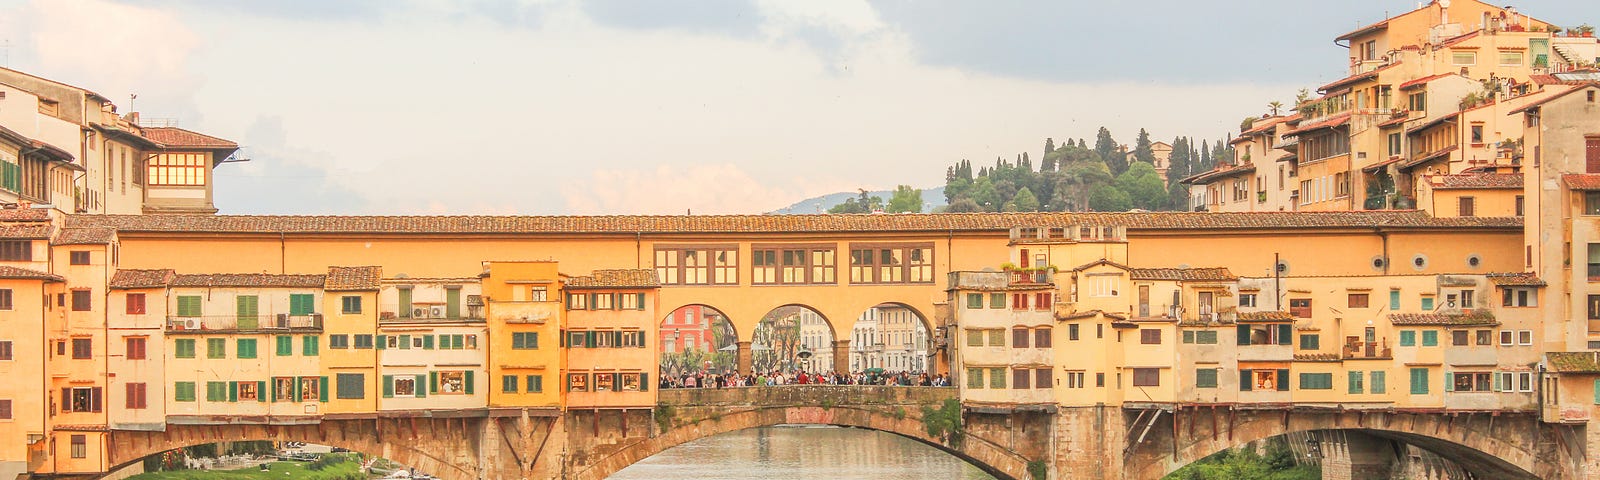 bridge in florence with colourful buildings banked on river